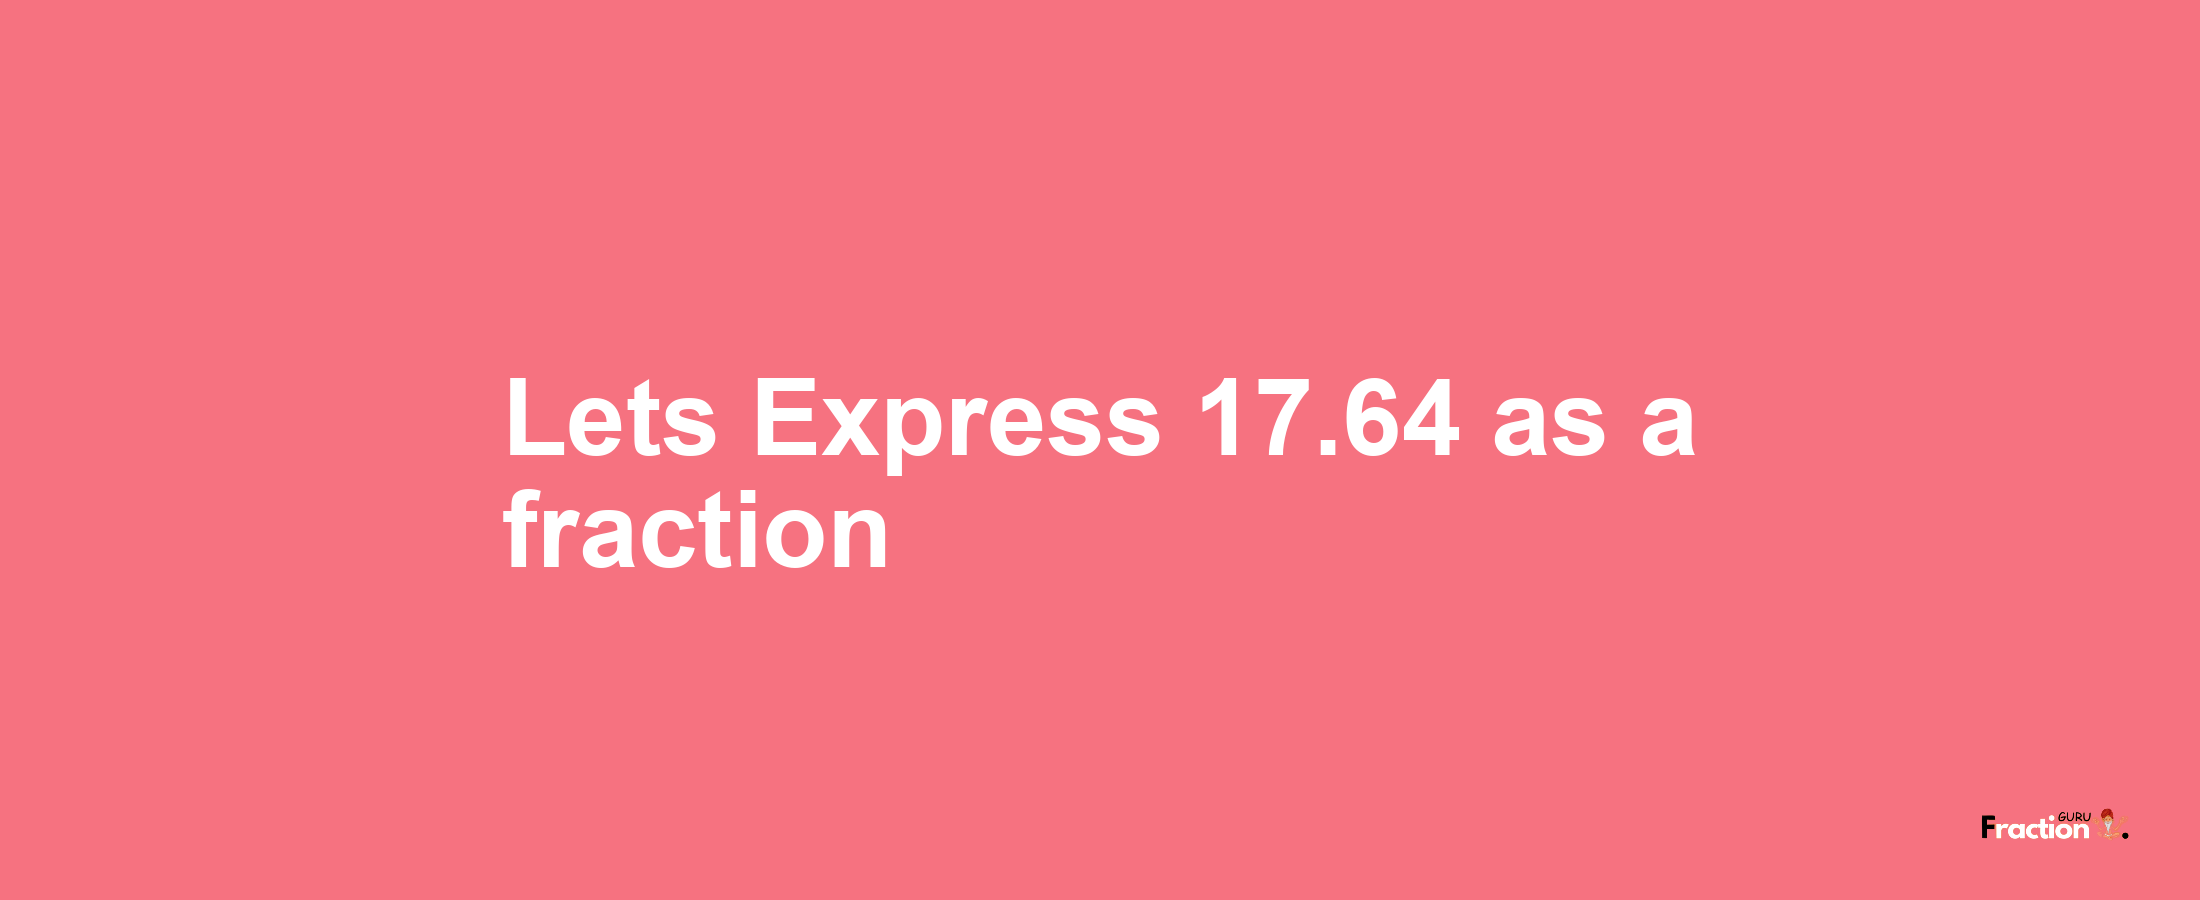 Lets Express 17.64 as afraction